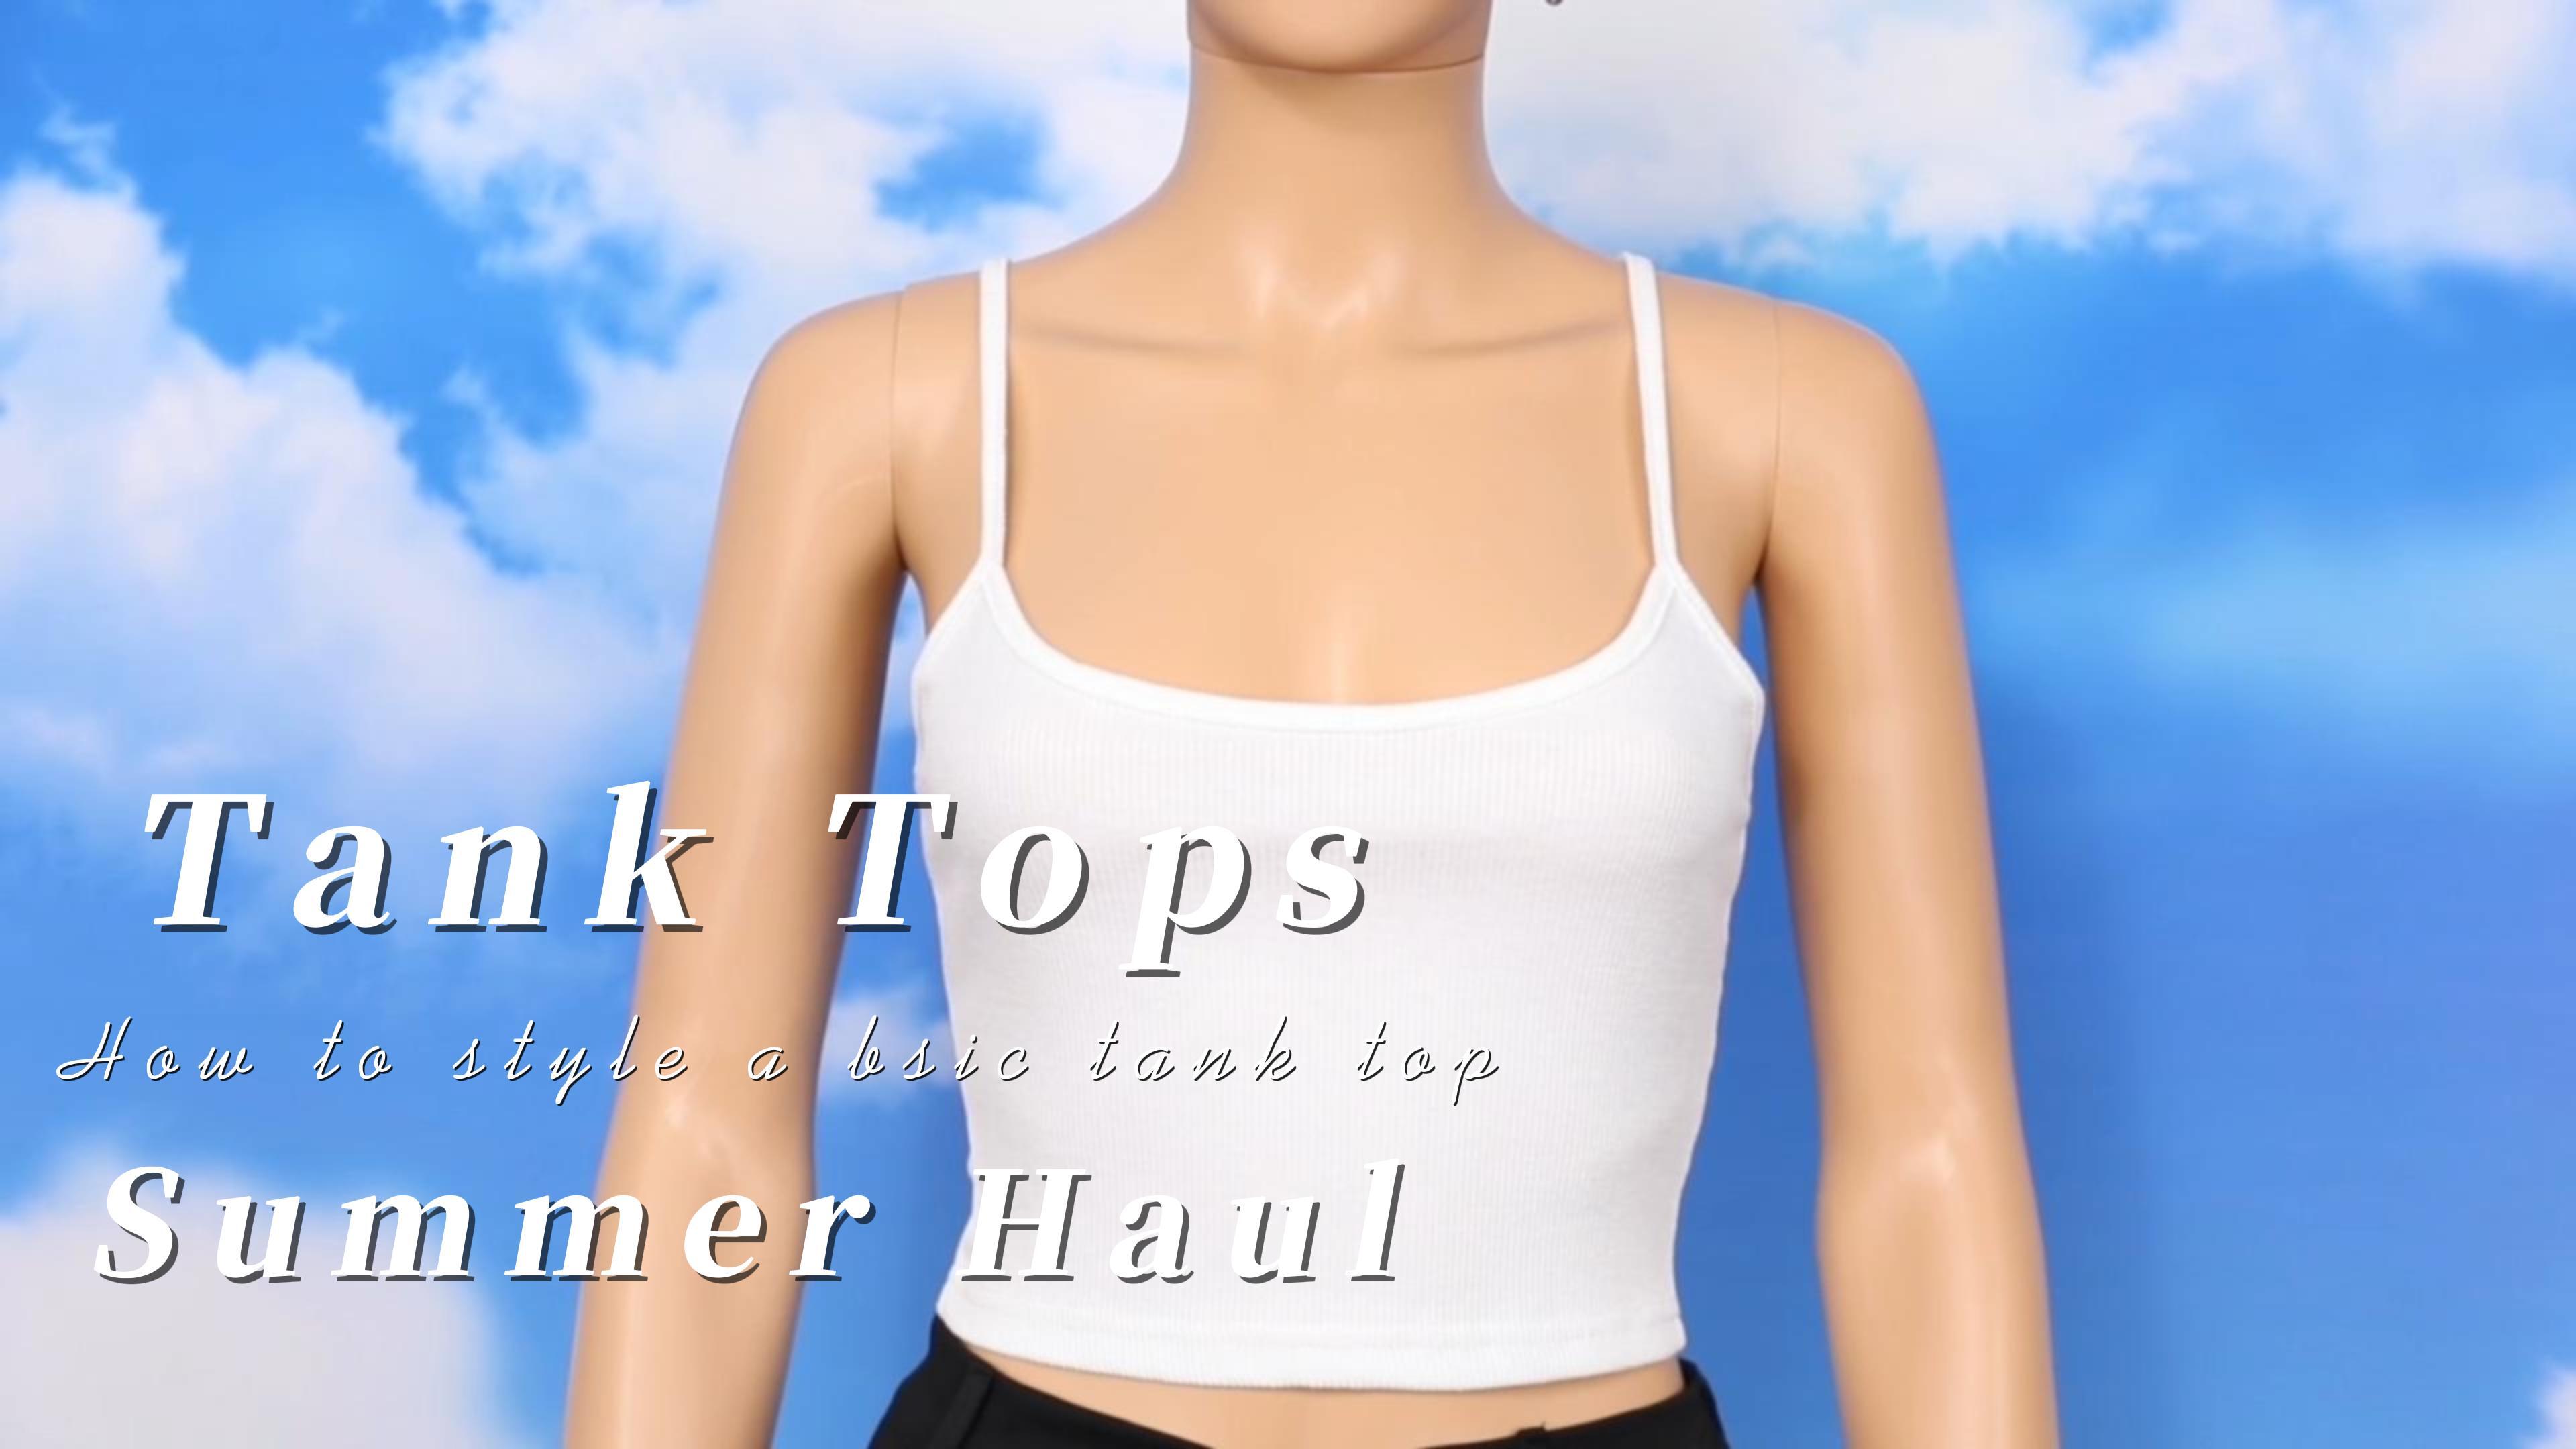 Bored To Wear Basic Tank Tops? Here Comes A New Way To Style